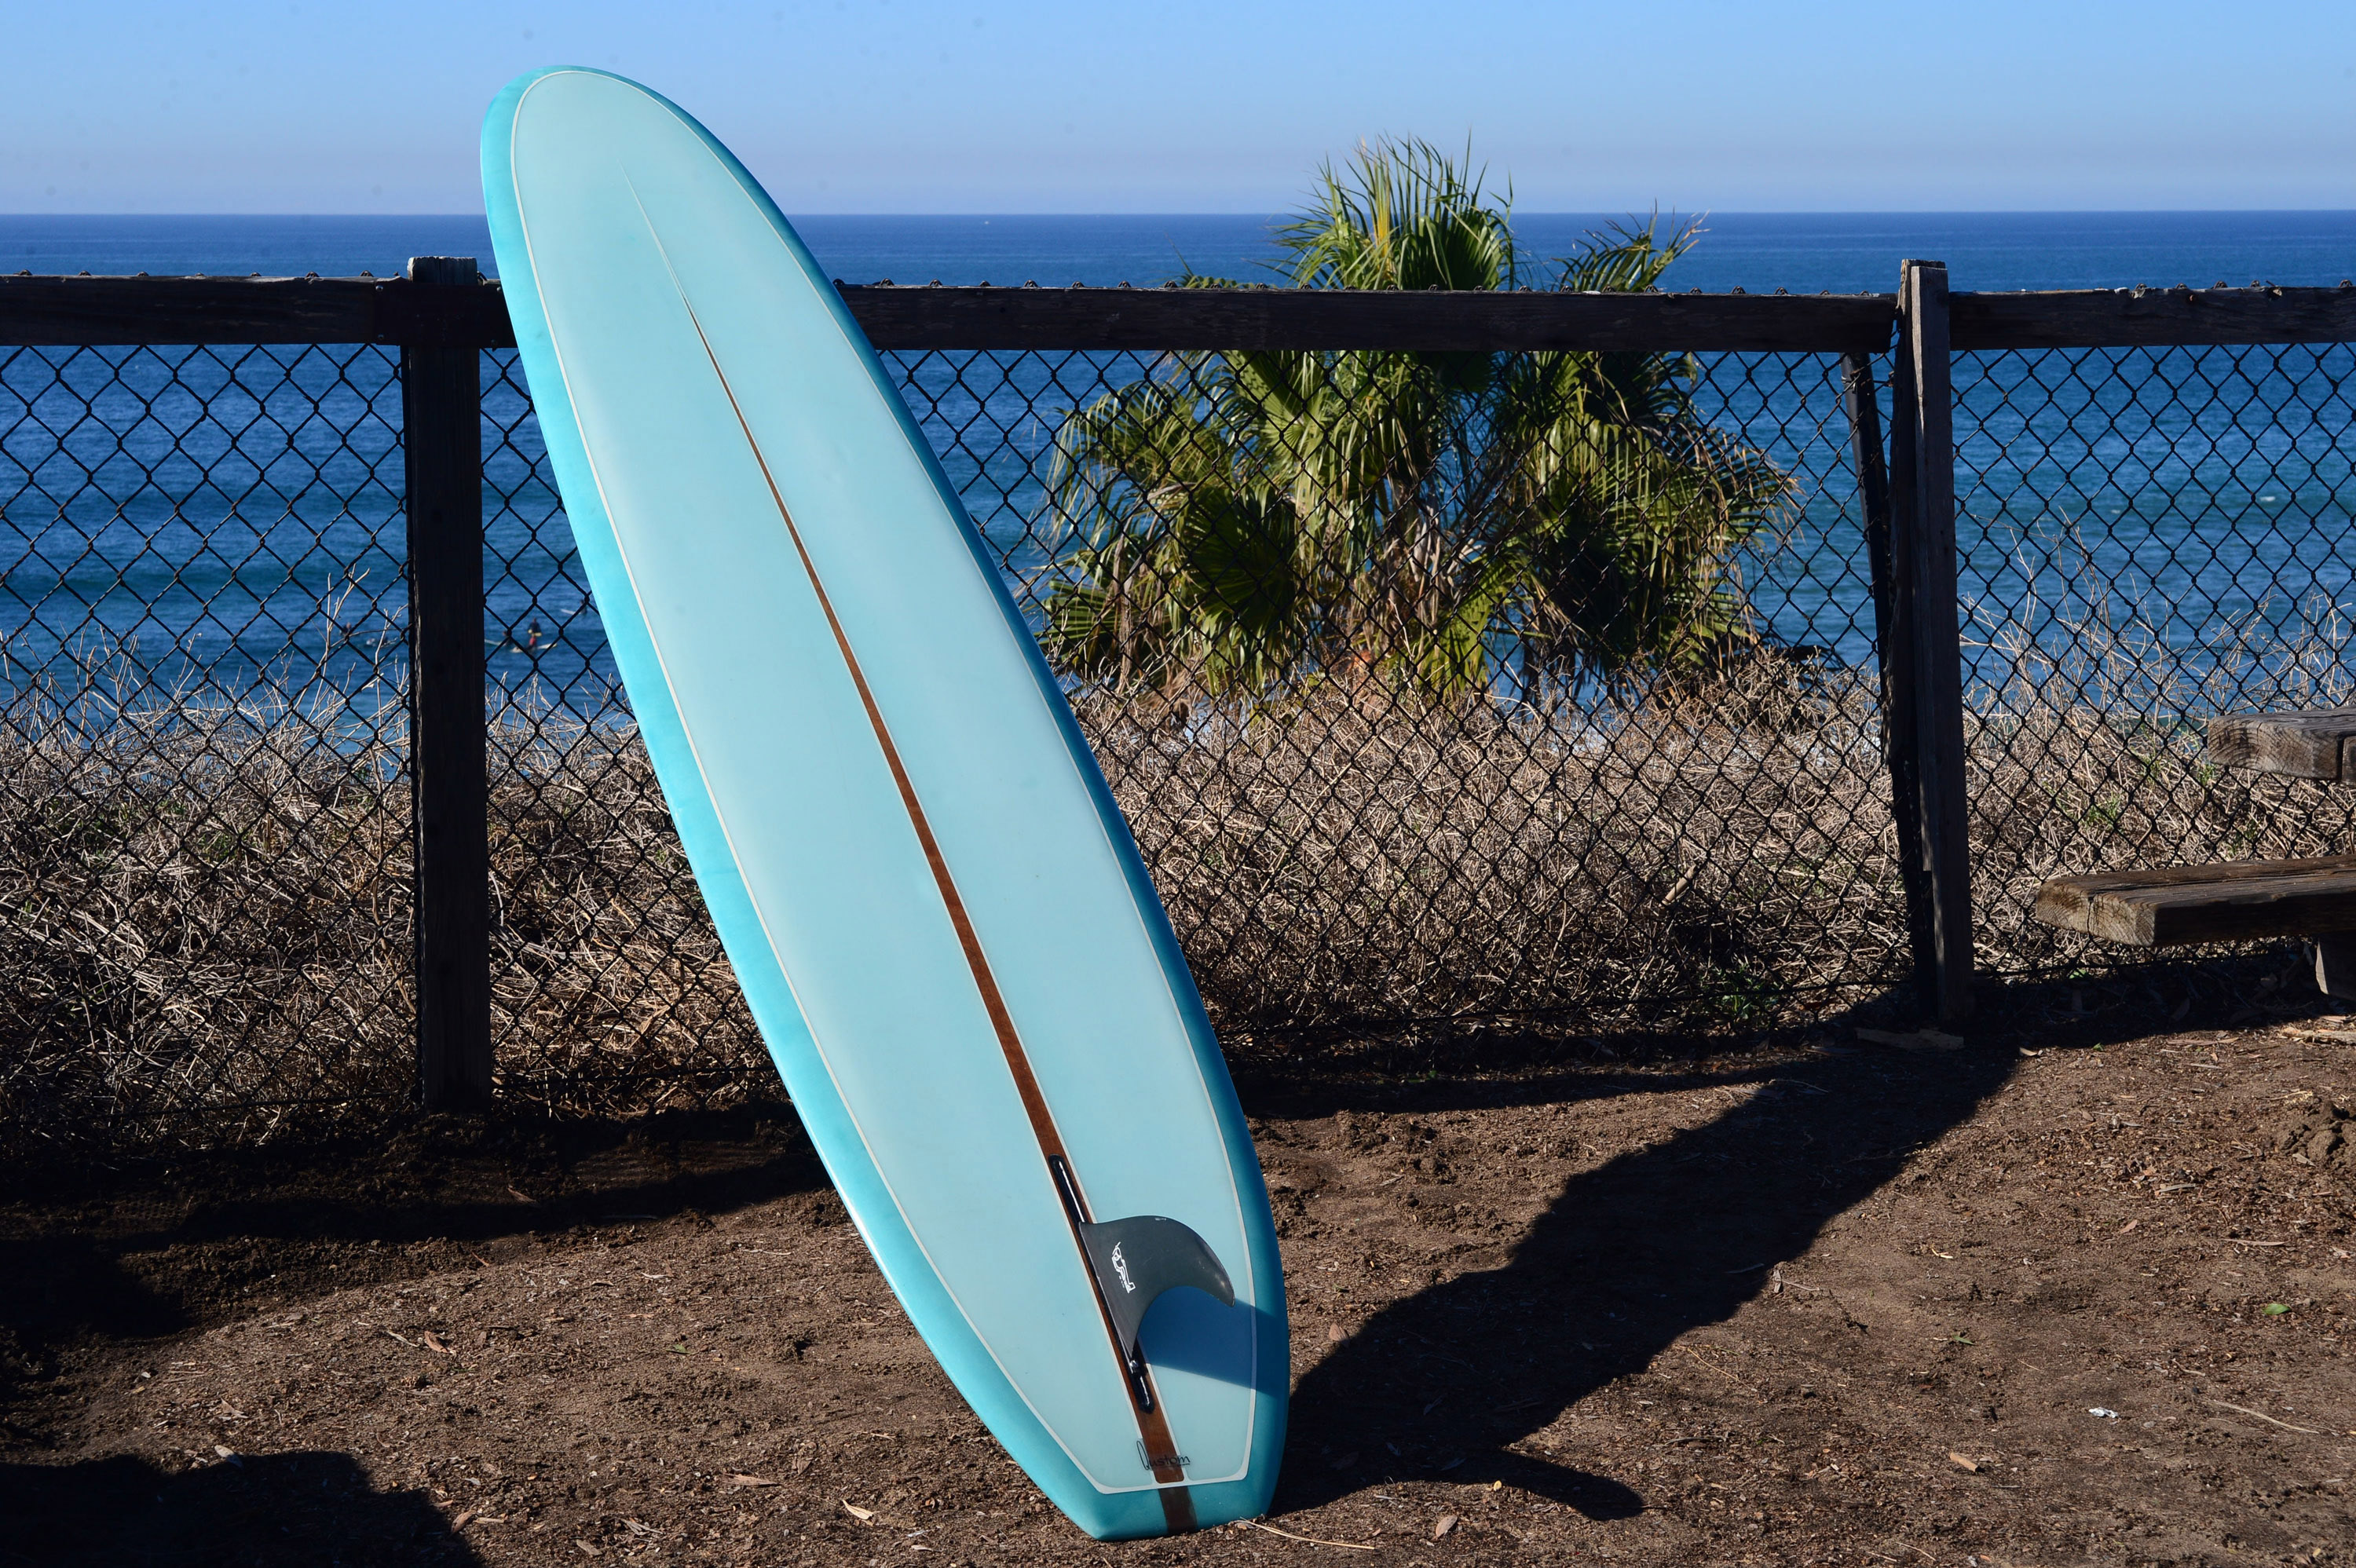 The Viceroy surfboard model